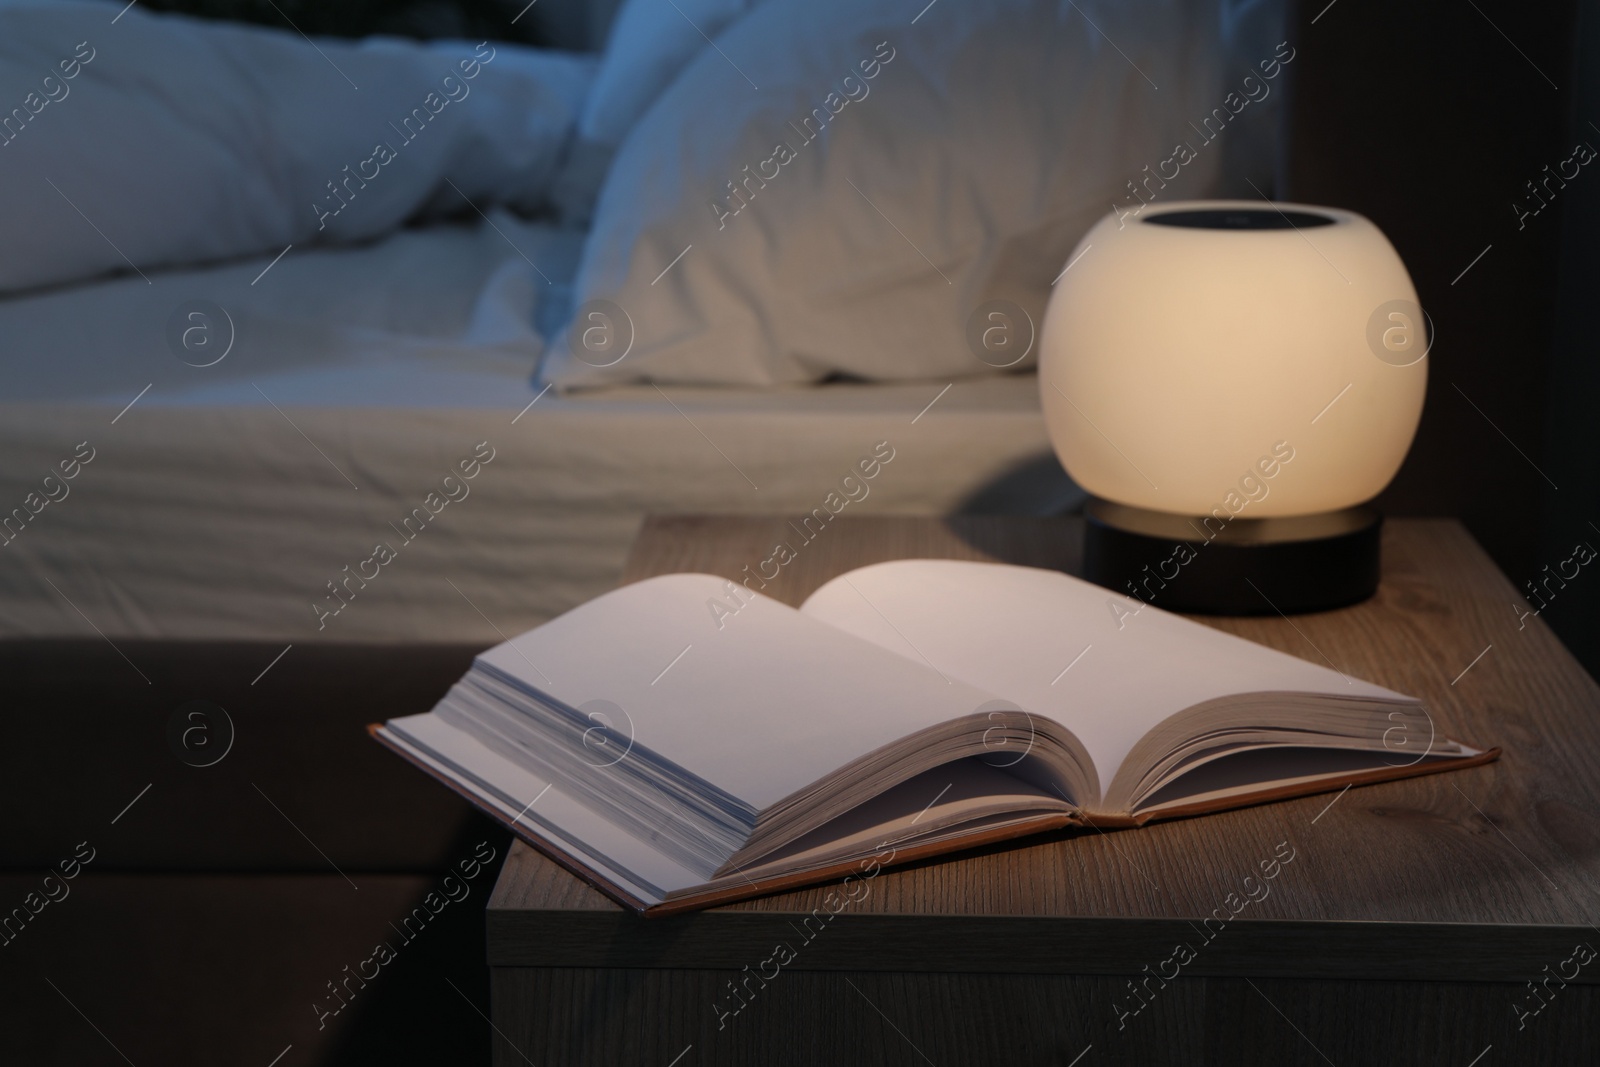 Photo of Stylish nightlight and book on bedside table near bed indoors